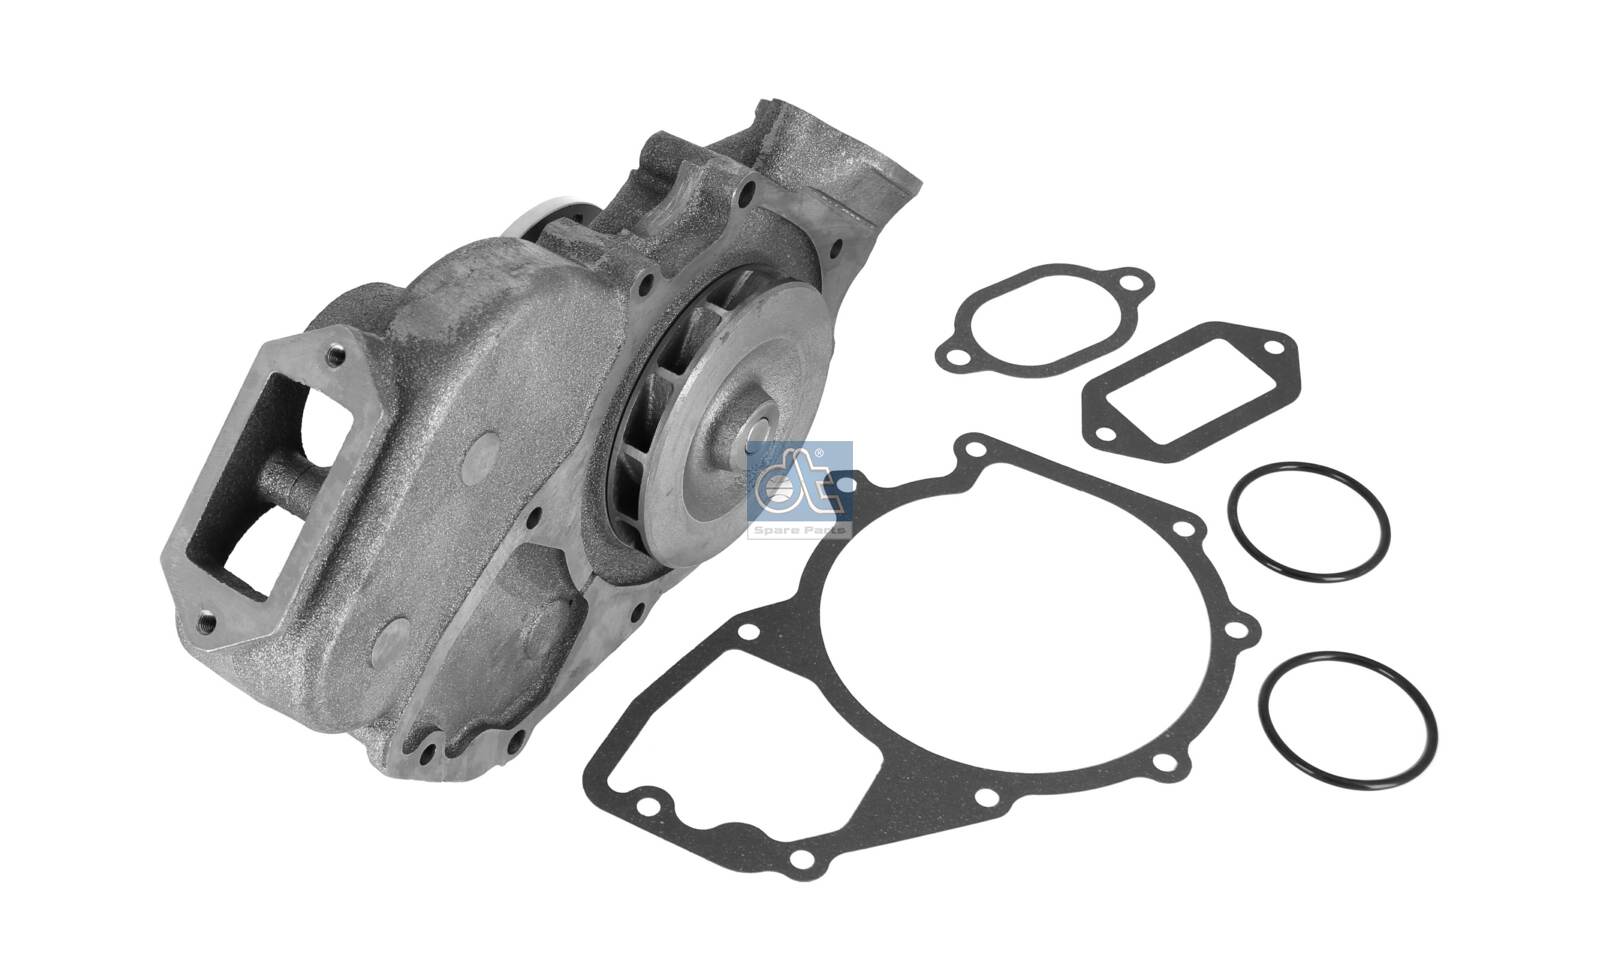 4.62589, Water Pump, engine cooling, DT Spare Parts, 4422000401, 4422010501, A4572010401, A4572002401, A4572001001, A4572000901, A4422000401, A4422010501, 4572002401, 4572010401, 4572000901, 4572001001, 4572001801, 010.722-00A, 01100021, 0119150, 012000457004, 0330200061, 081201960150, 12380130, 20160345708, 20200183, 2201057, 241327, 28626, 350680, 4057795427891, 57676, 8MP376809-024, DP147